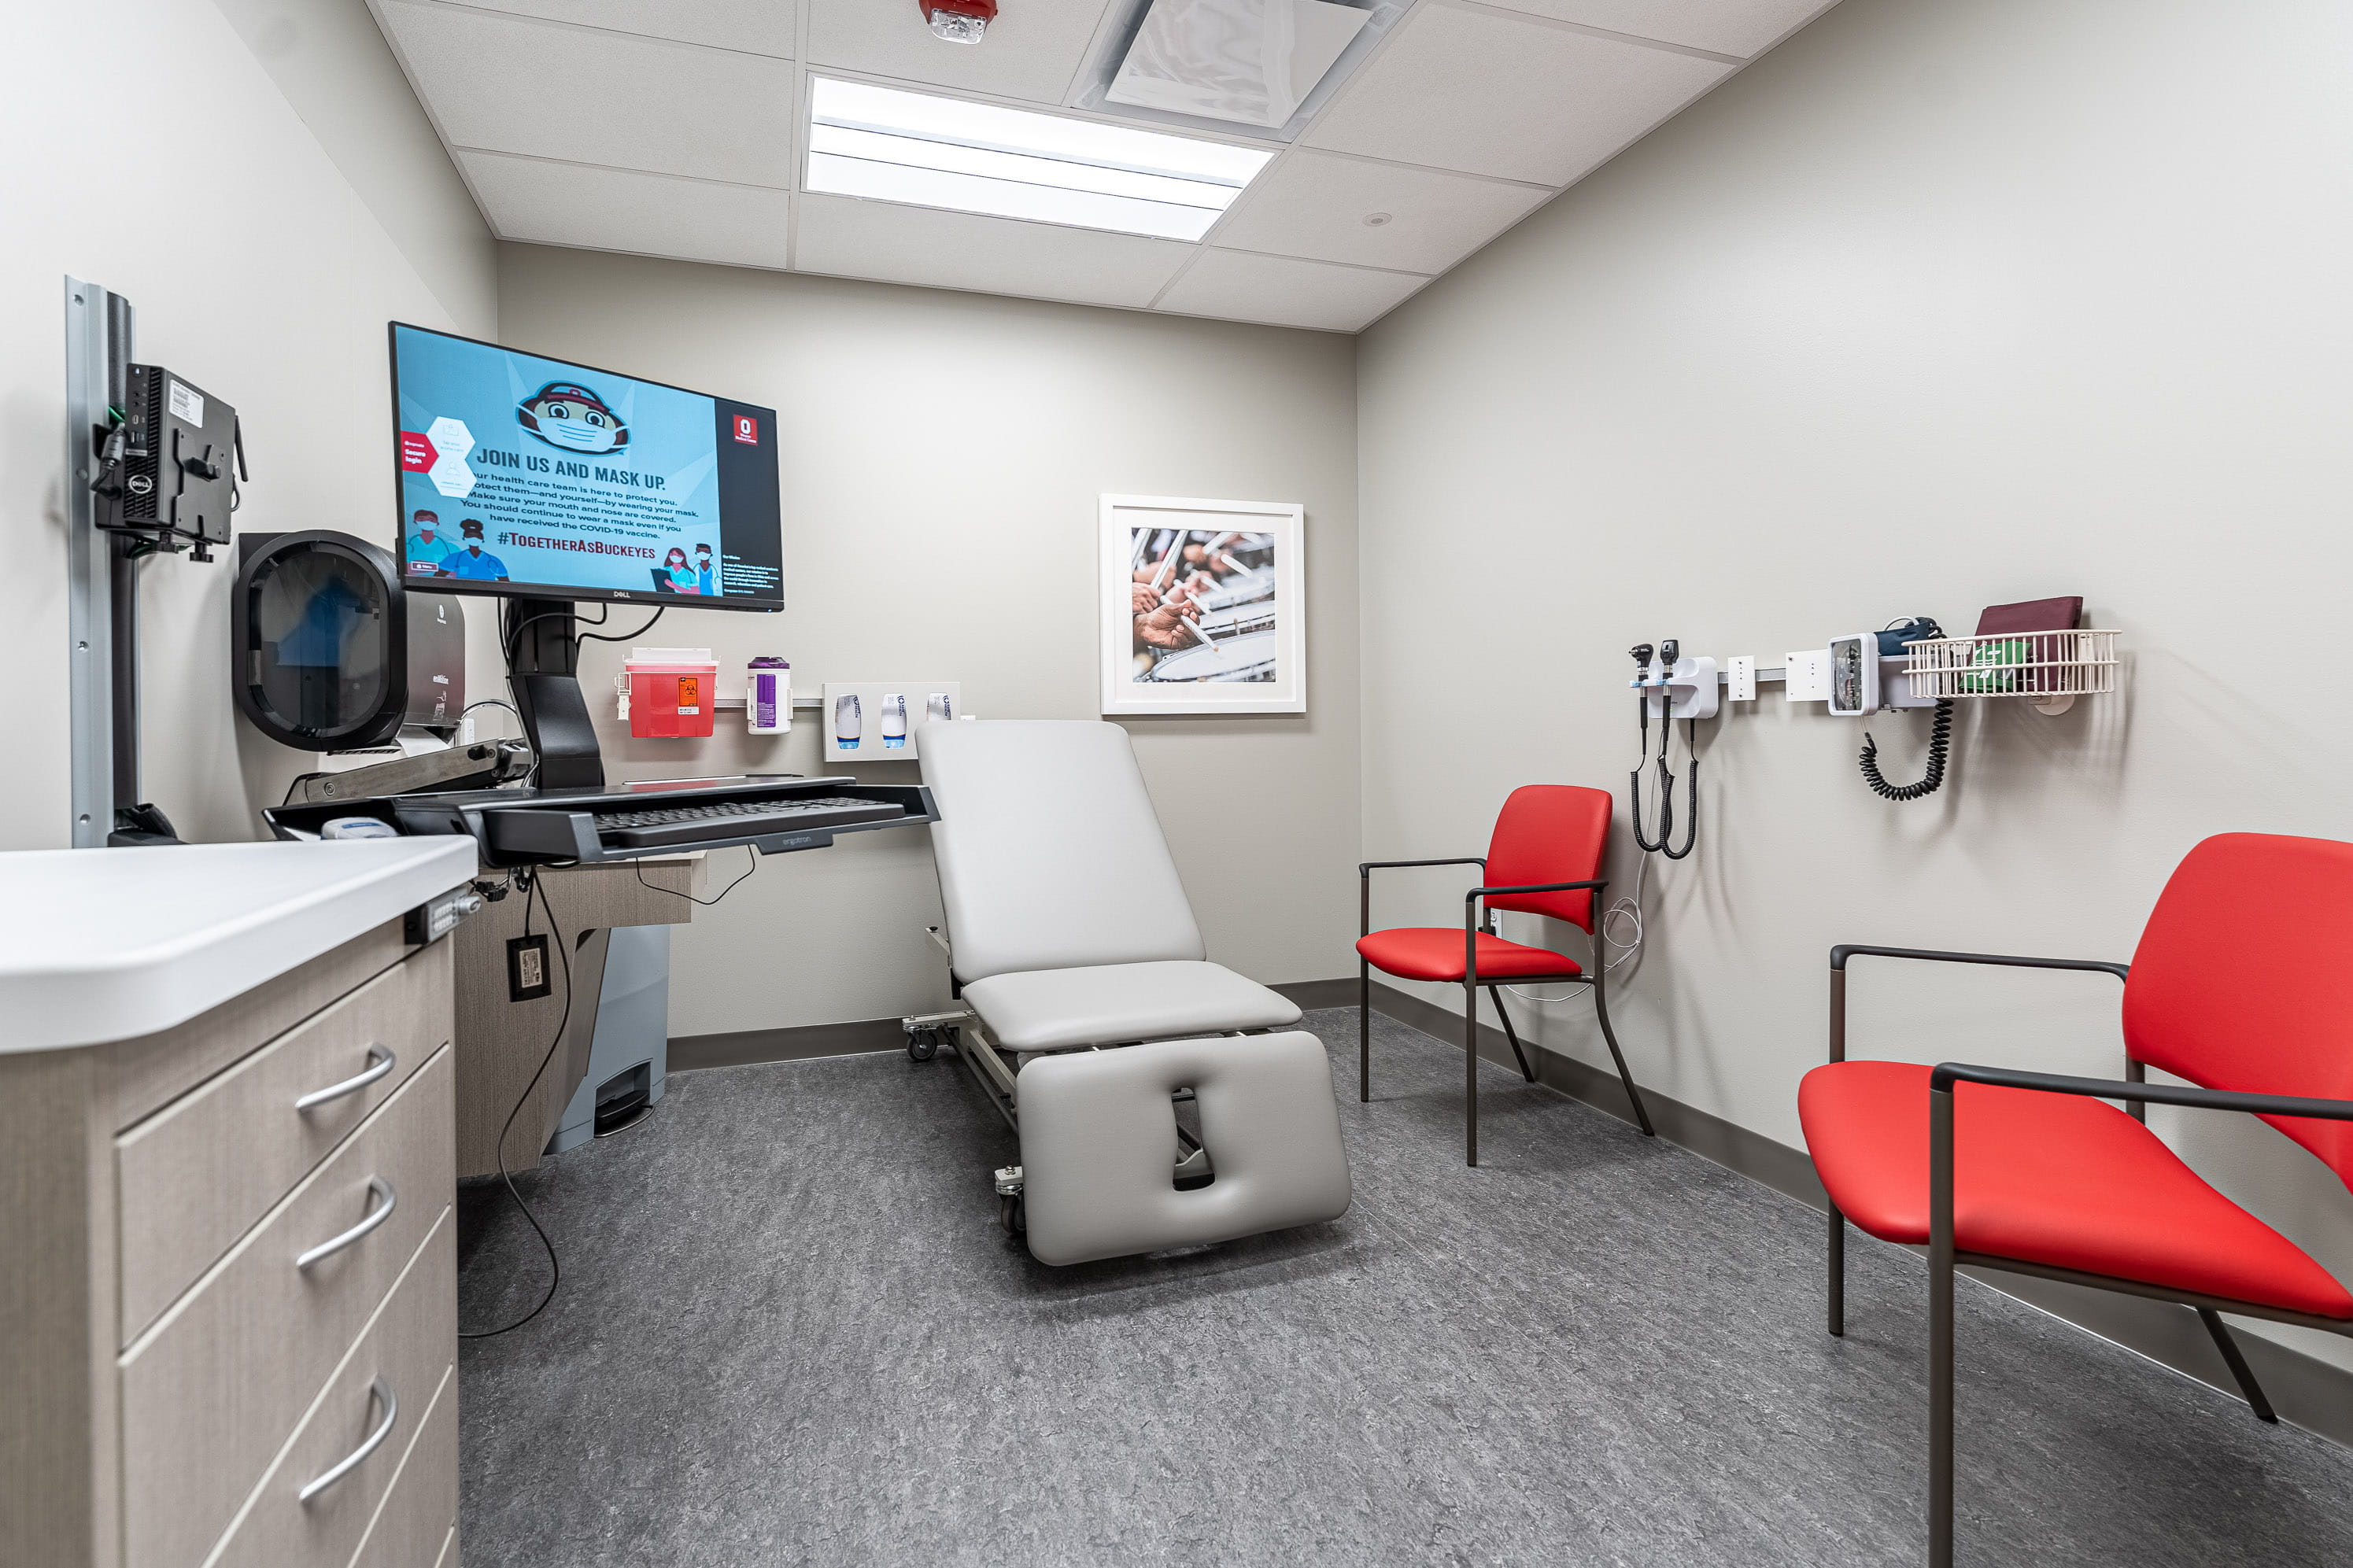 Outpatient Care New Albany exam room